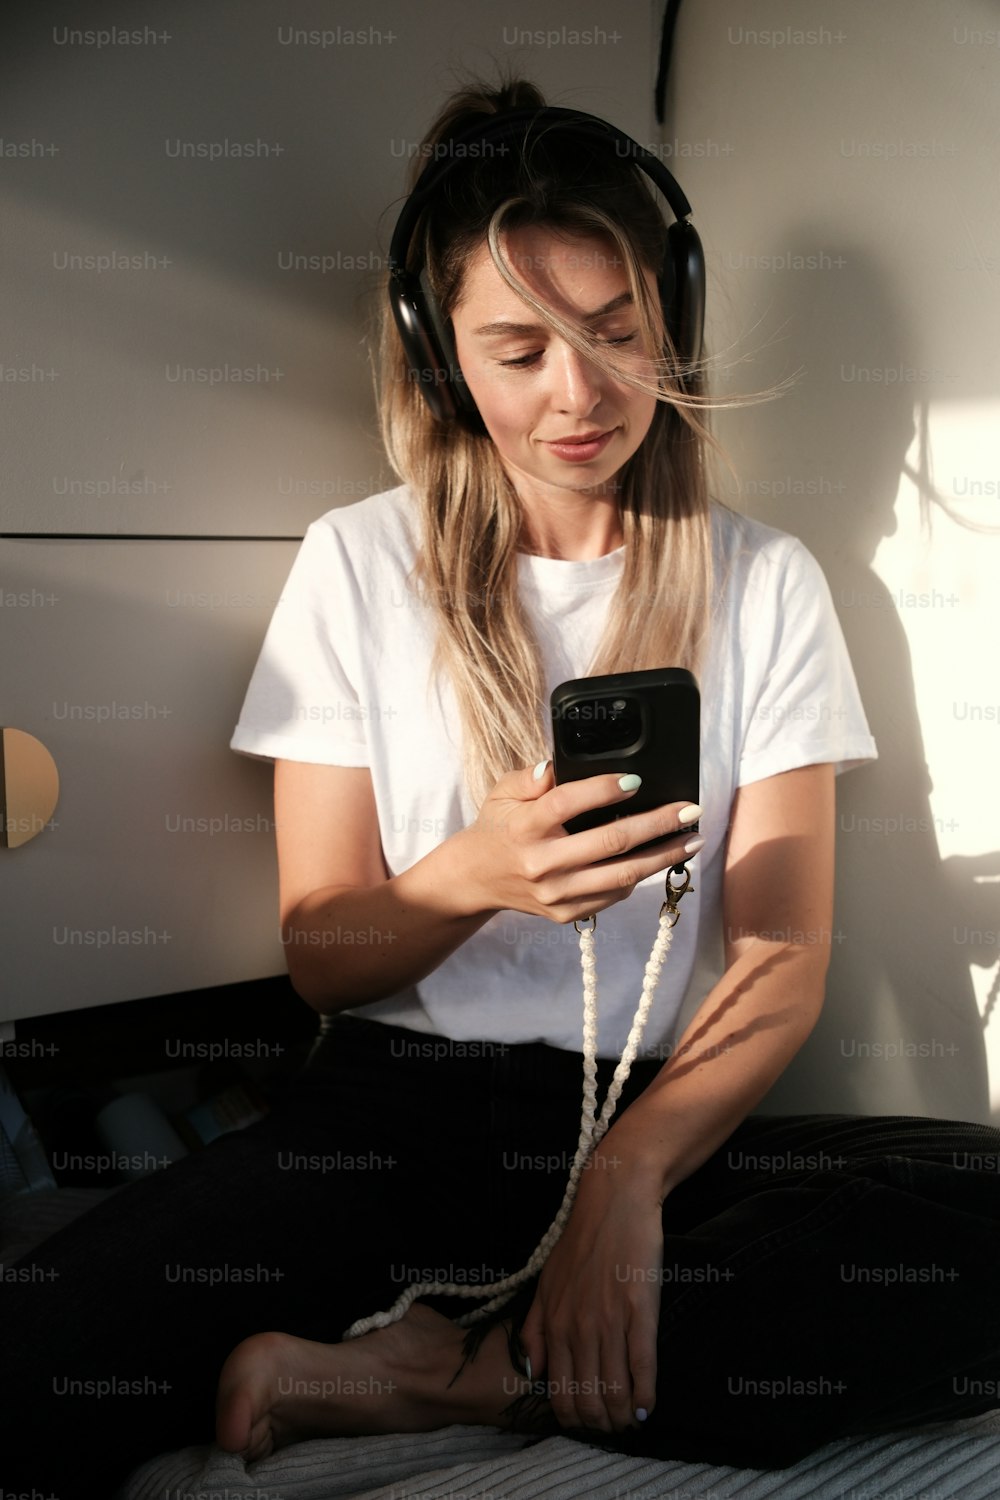 a woman sitting on a bed wearing headphones